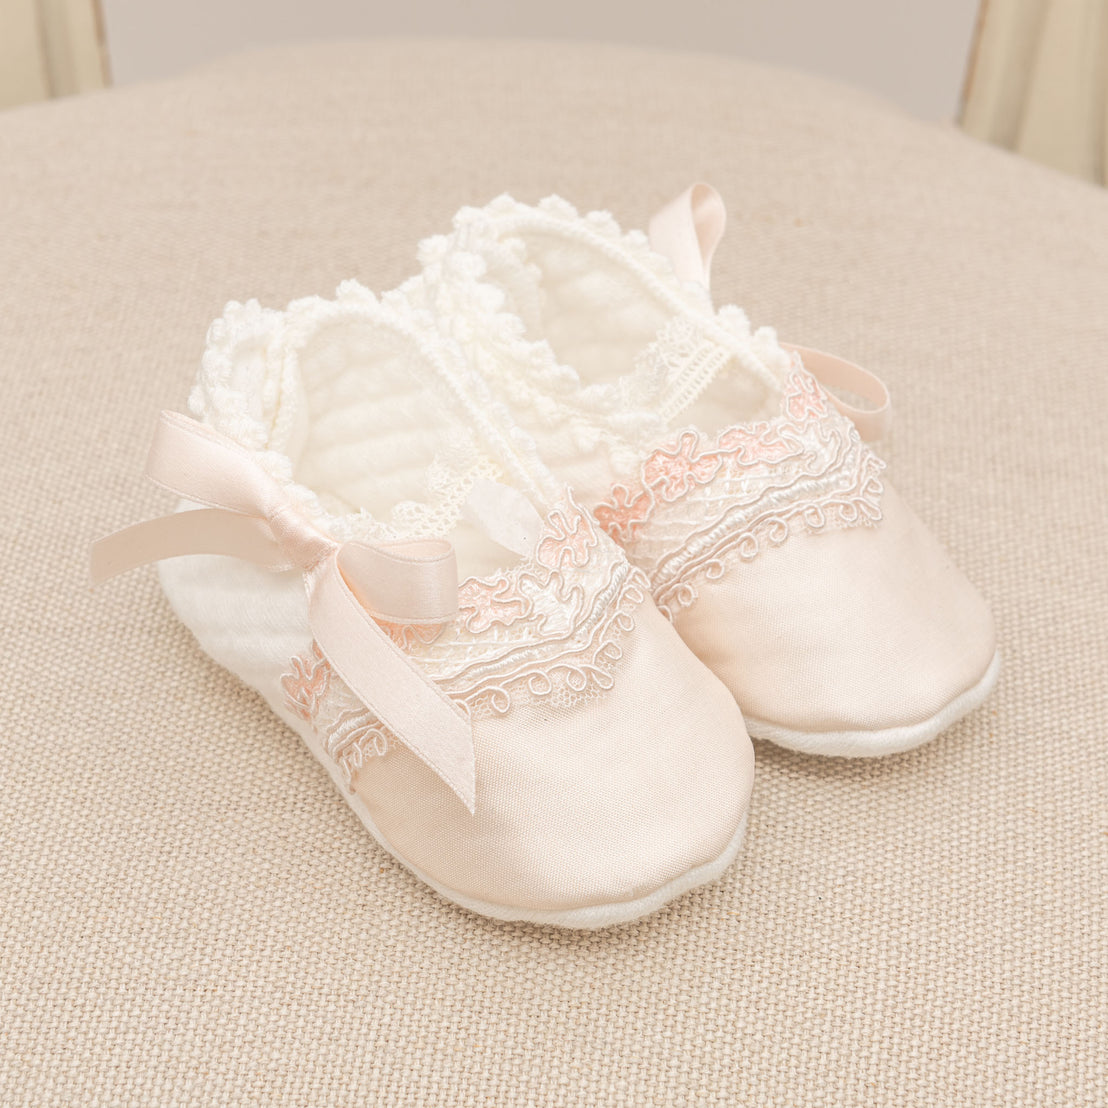 A pair of delicate, pink baby Elizabeth shoes with lace detailing and ribbon ties, neatly placed on a soft beige textured surface, perfect for a christening.